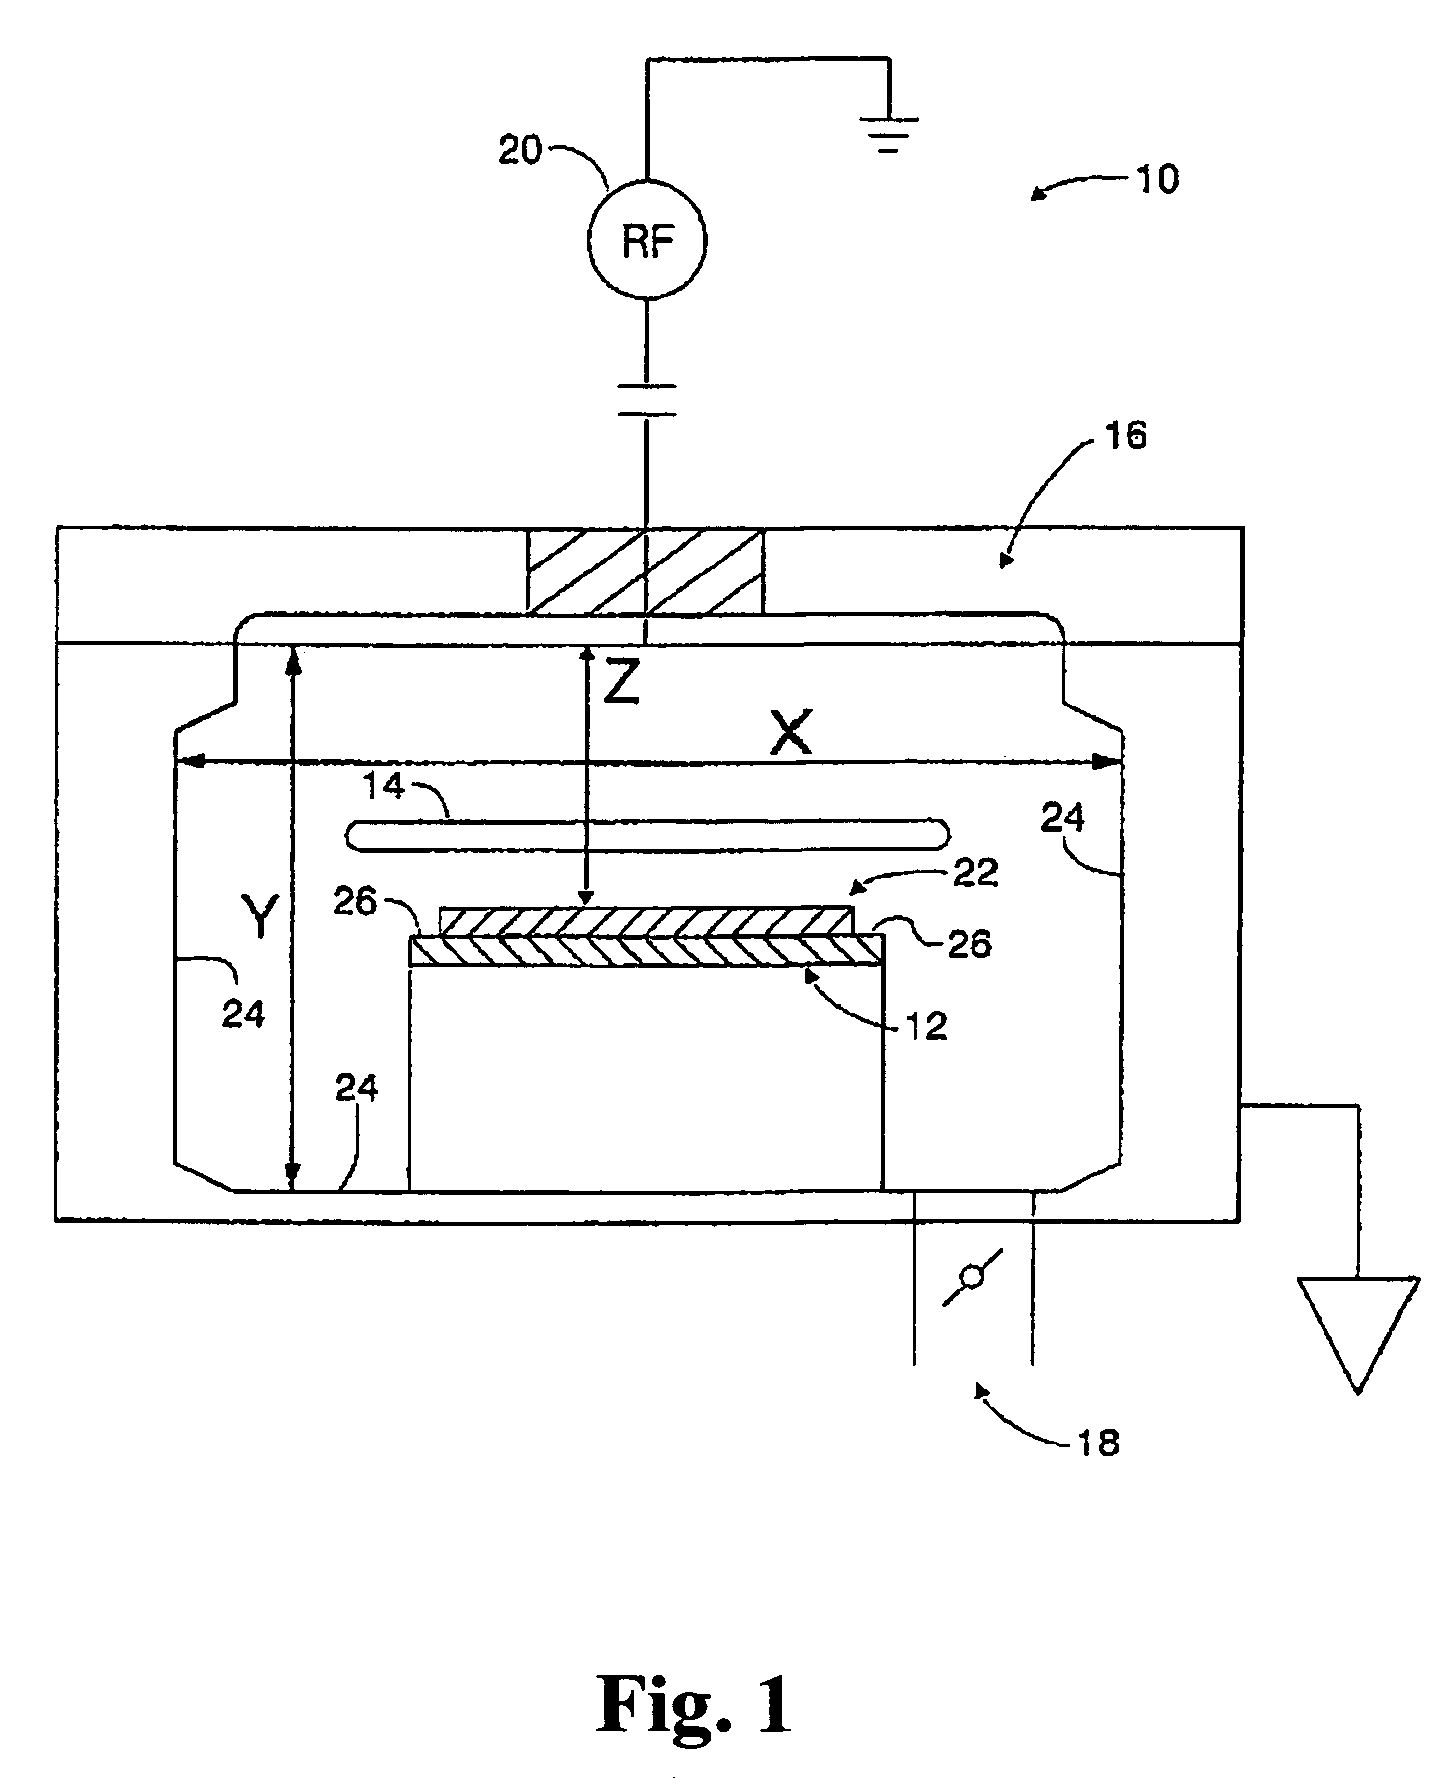 Method for fabricating an ultralow dielectric constant material as an intralevel or interlevel dielectric in a semiconductor device and electronic device made